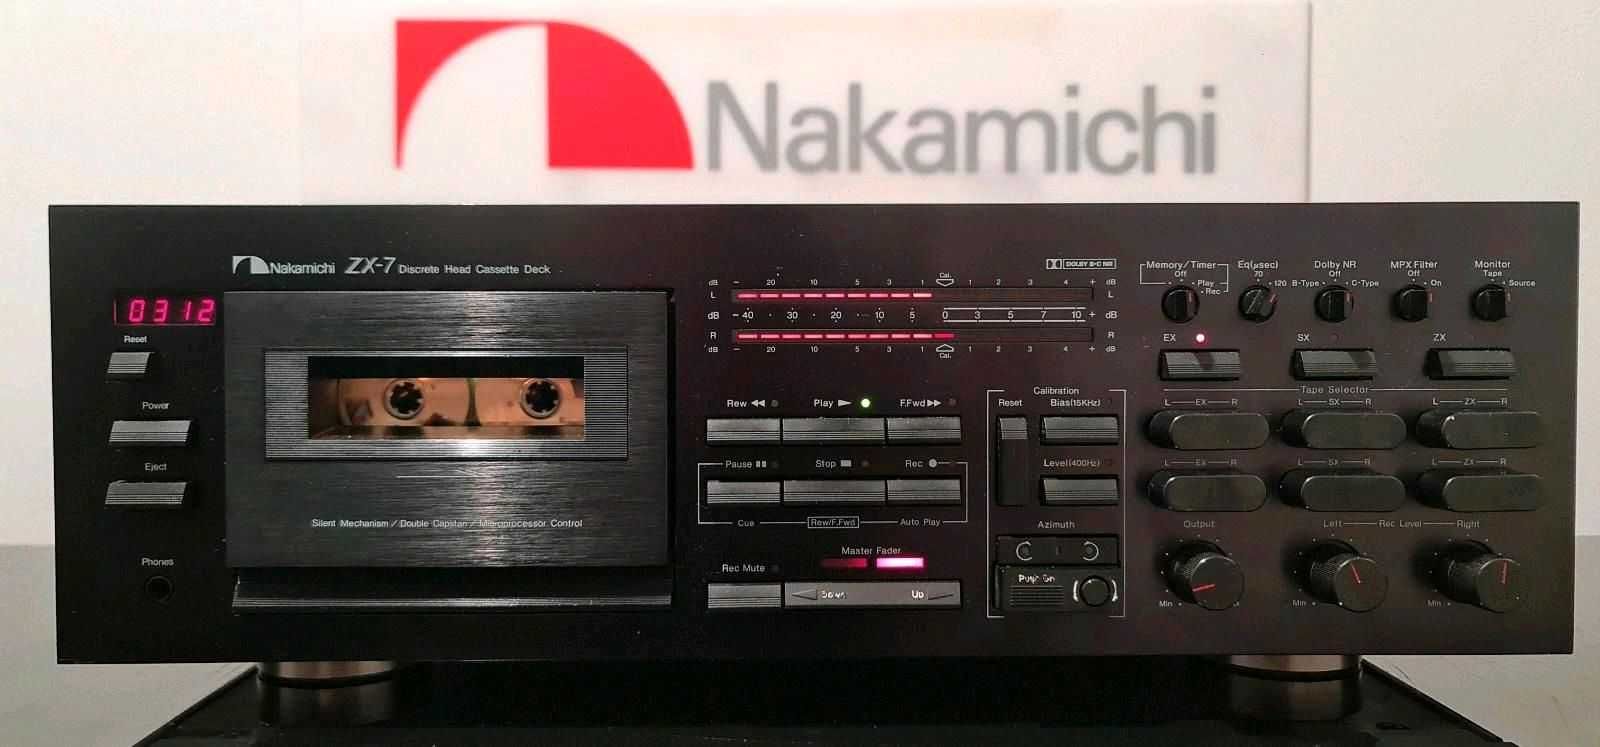 Nakamichi ZX-7 casety deck (Made in Japan)